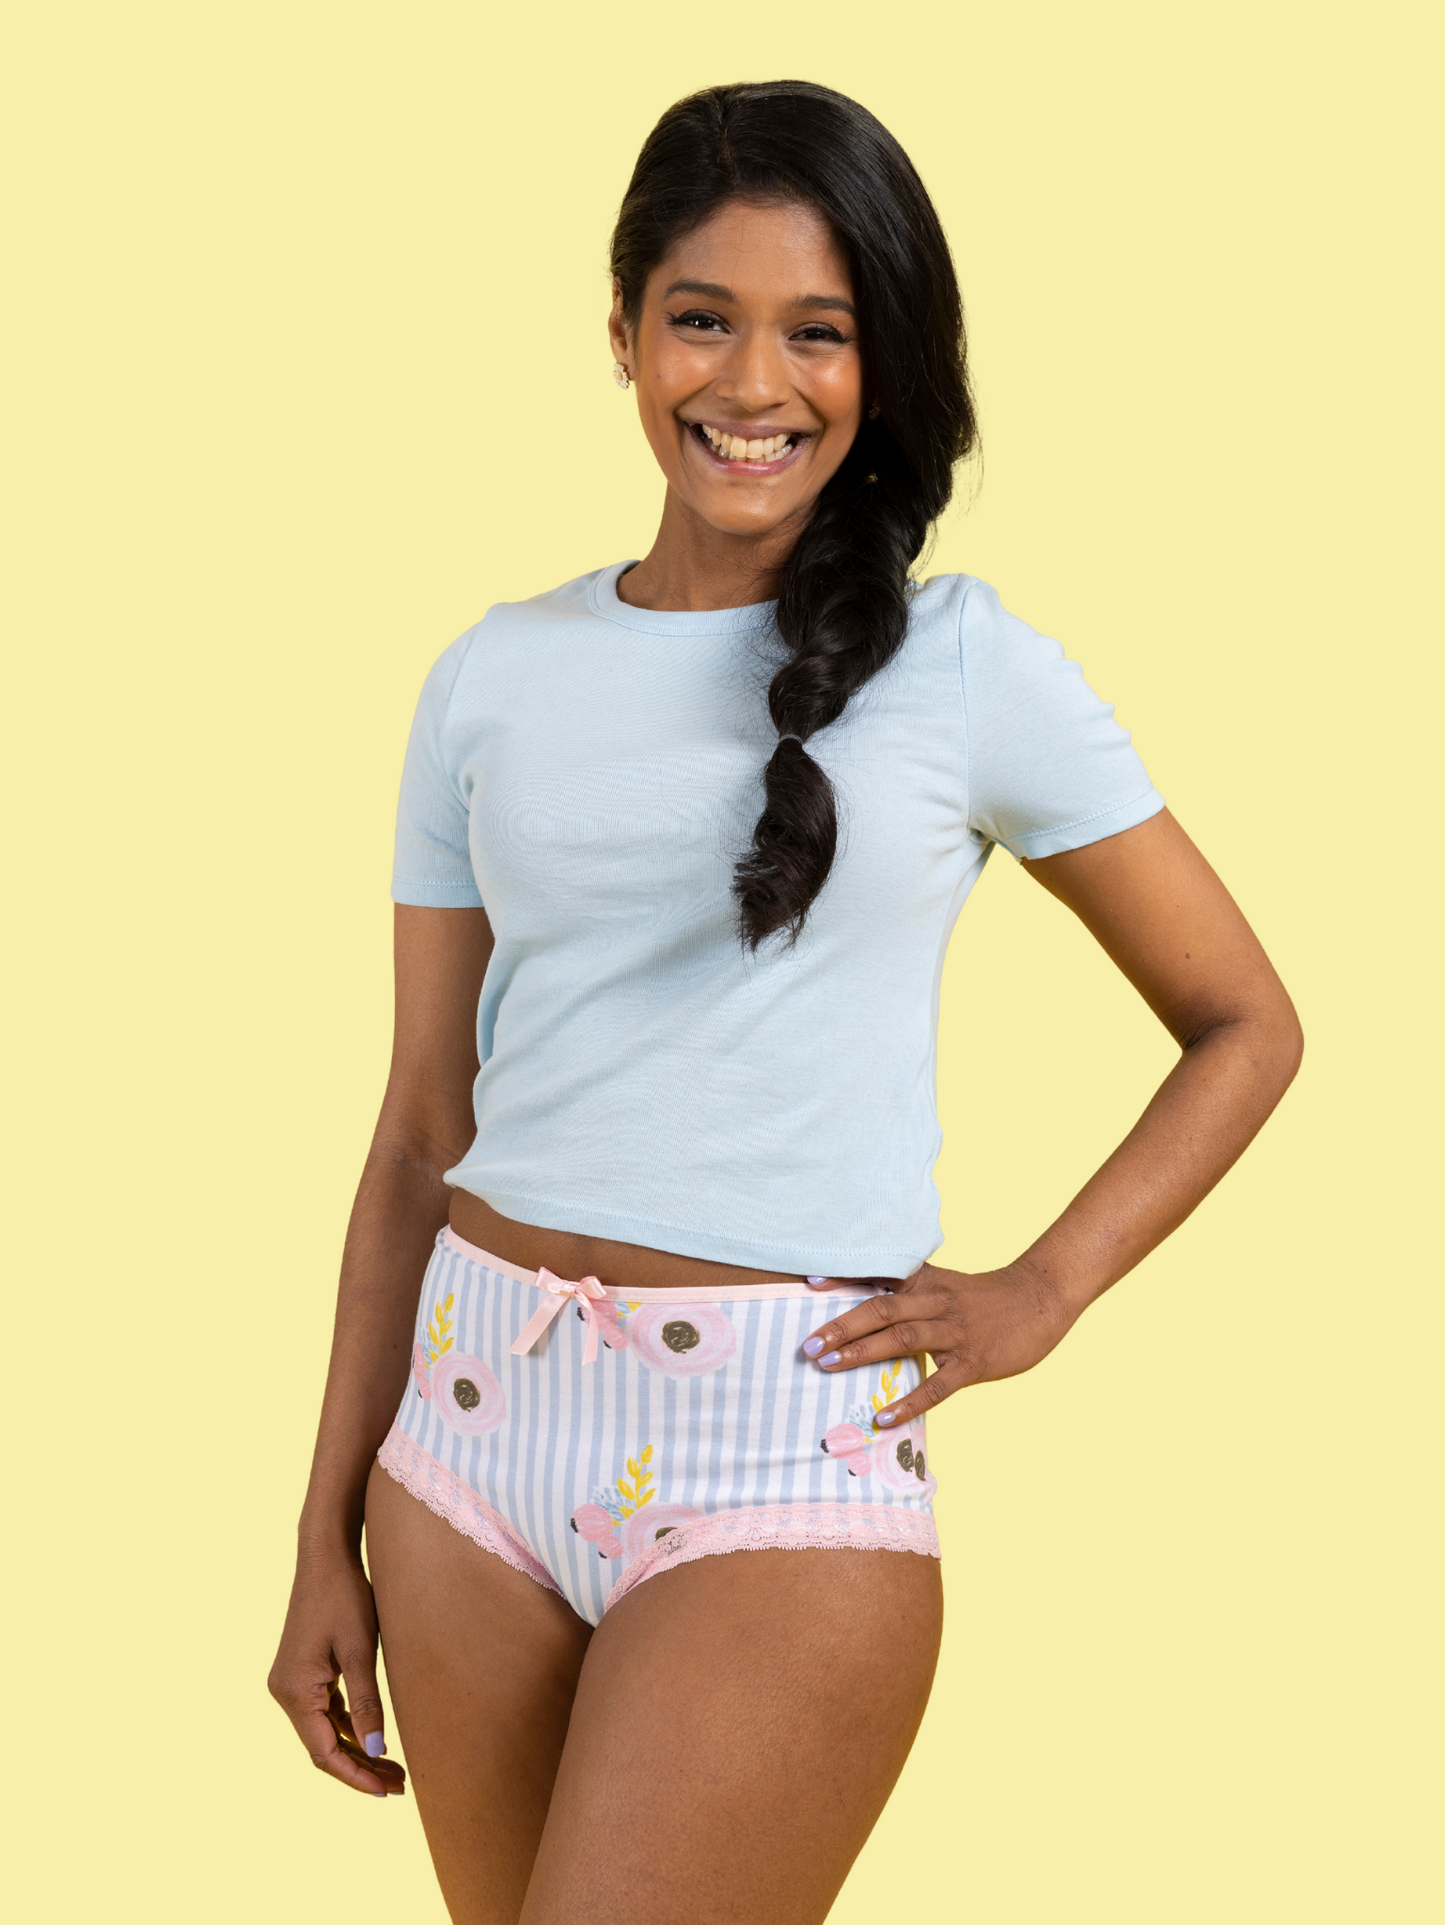 Iris Knickers by Tilly and The Buttons